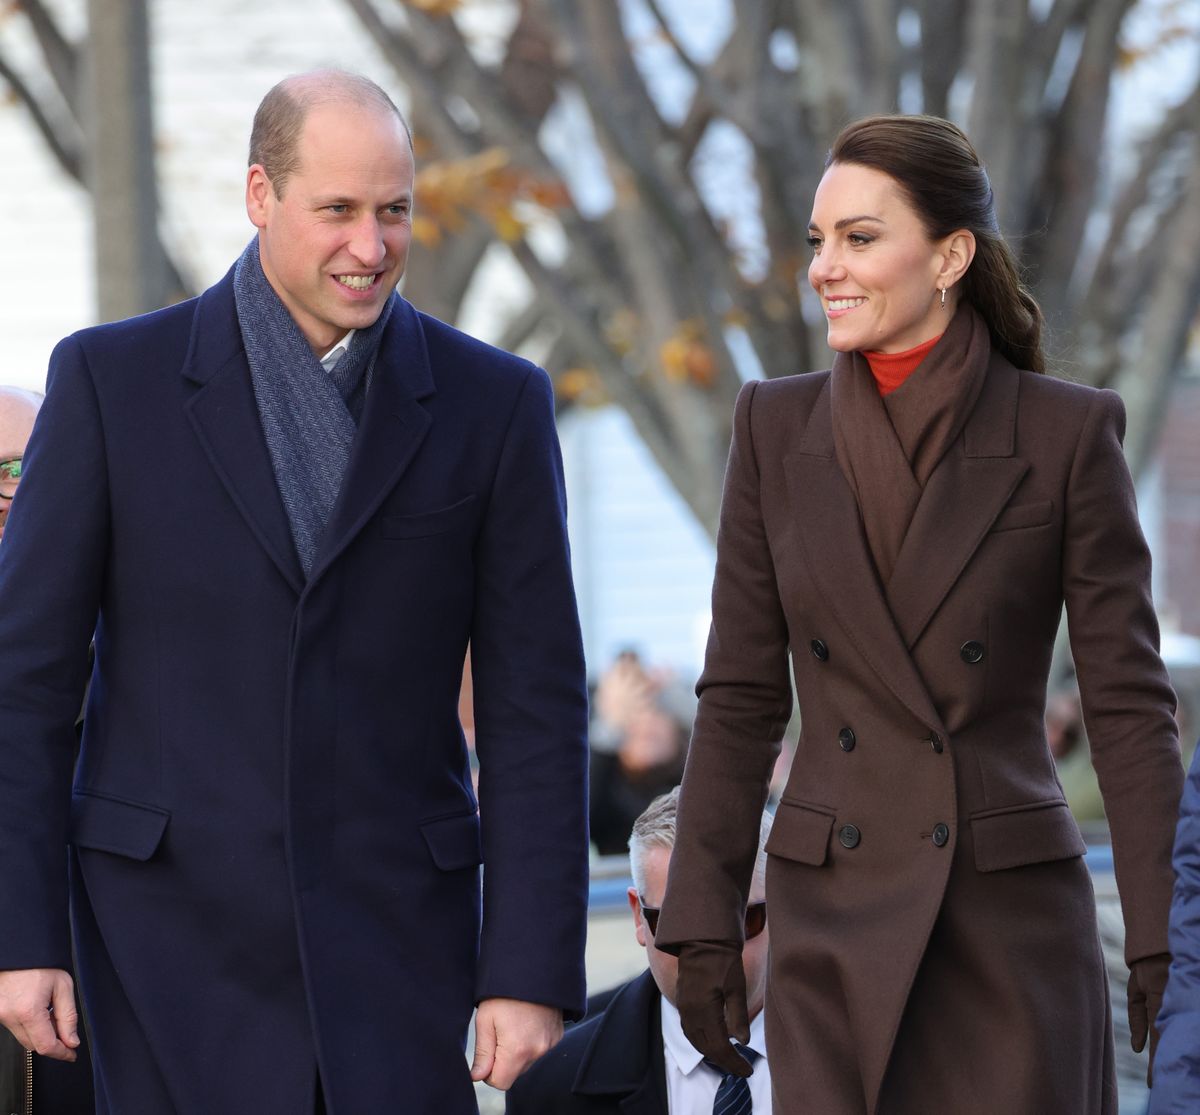 Every Photo from Prince William & Kate Middleton's Tour of Boston